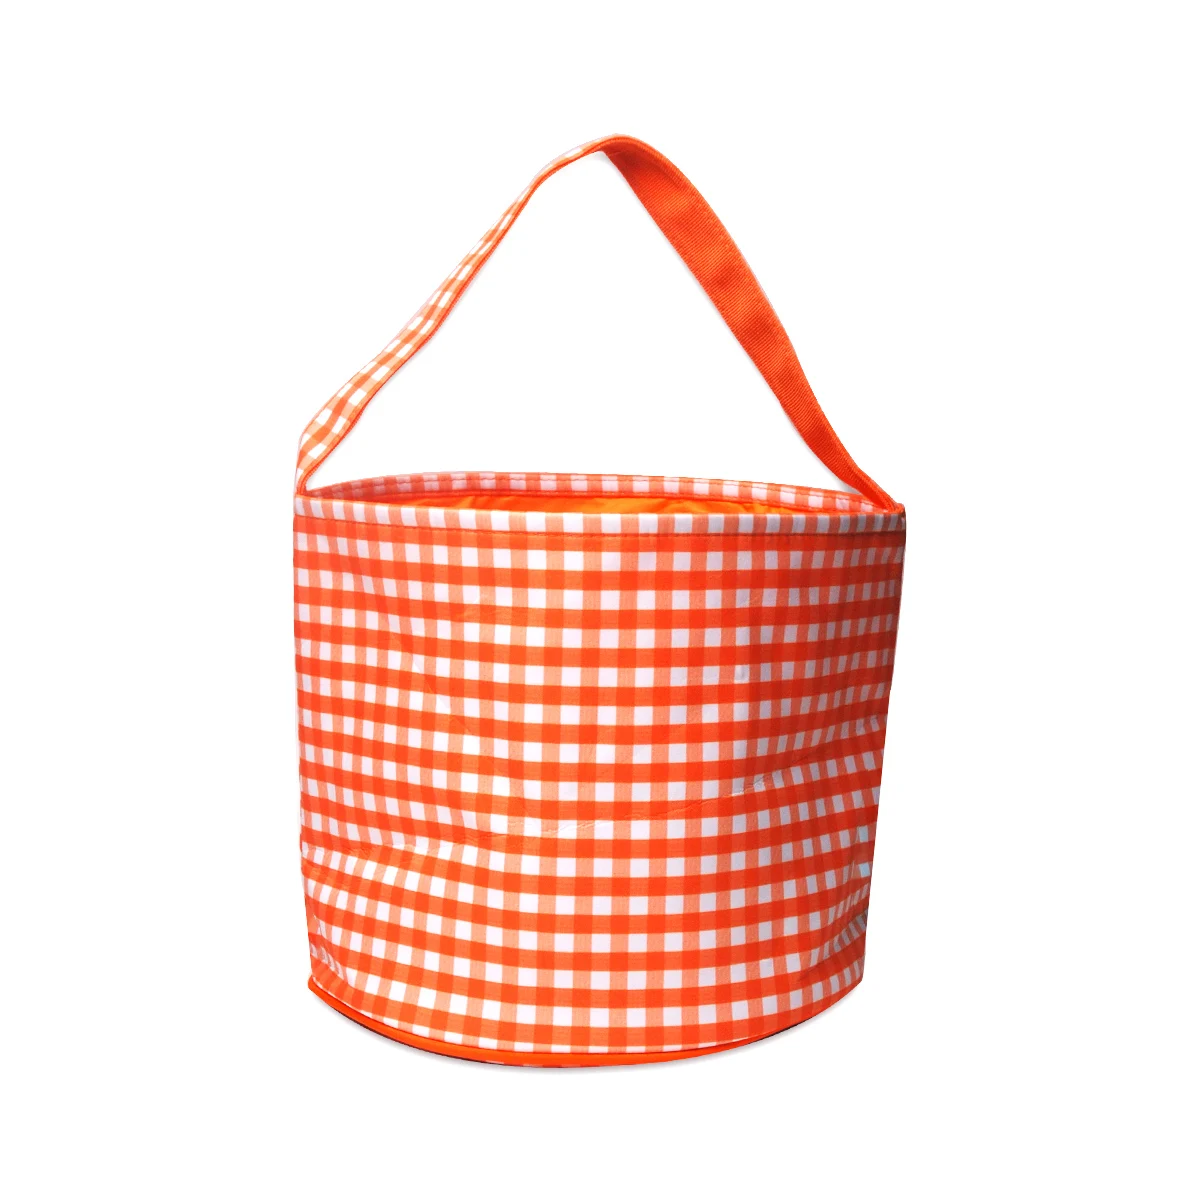 

2021 Wholesale Halloween Trick or Treat Bags Halloween Candy Buckets Tote Bags Orange Black with Candy Corn DOM1061352